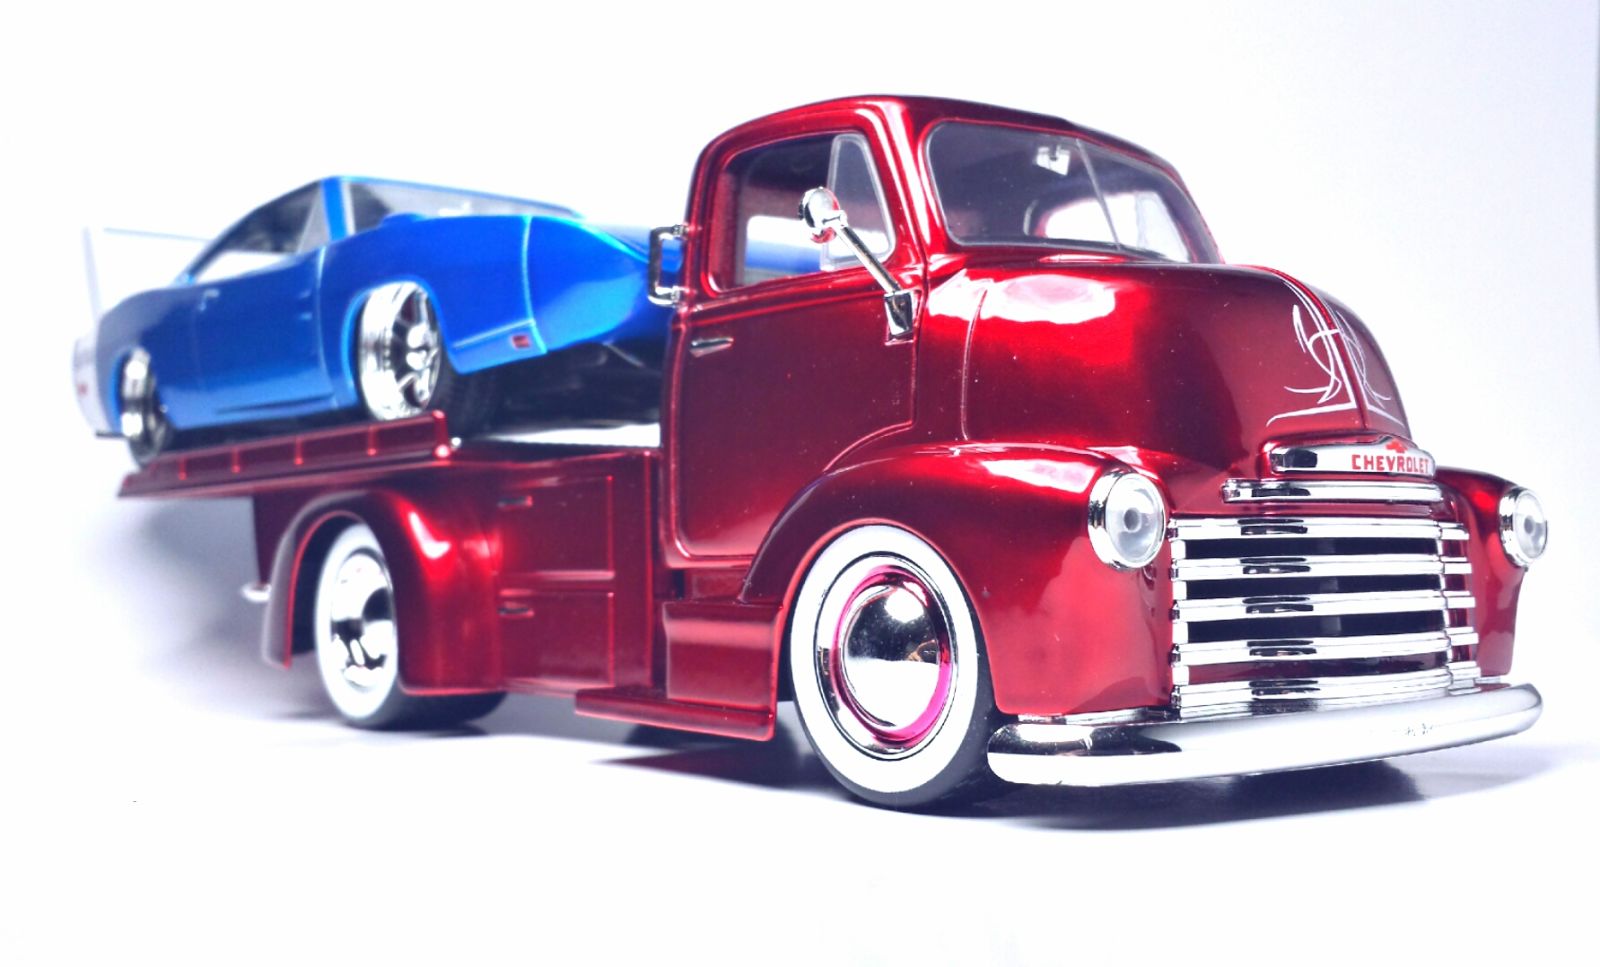 Illustration for article titled Working Wednesday: 1952 Chevy COE Flatbed